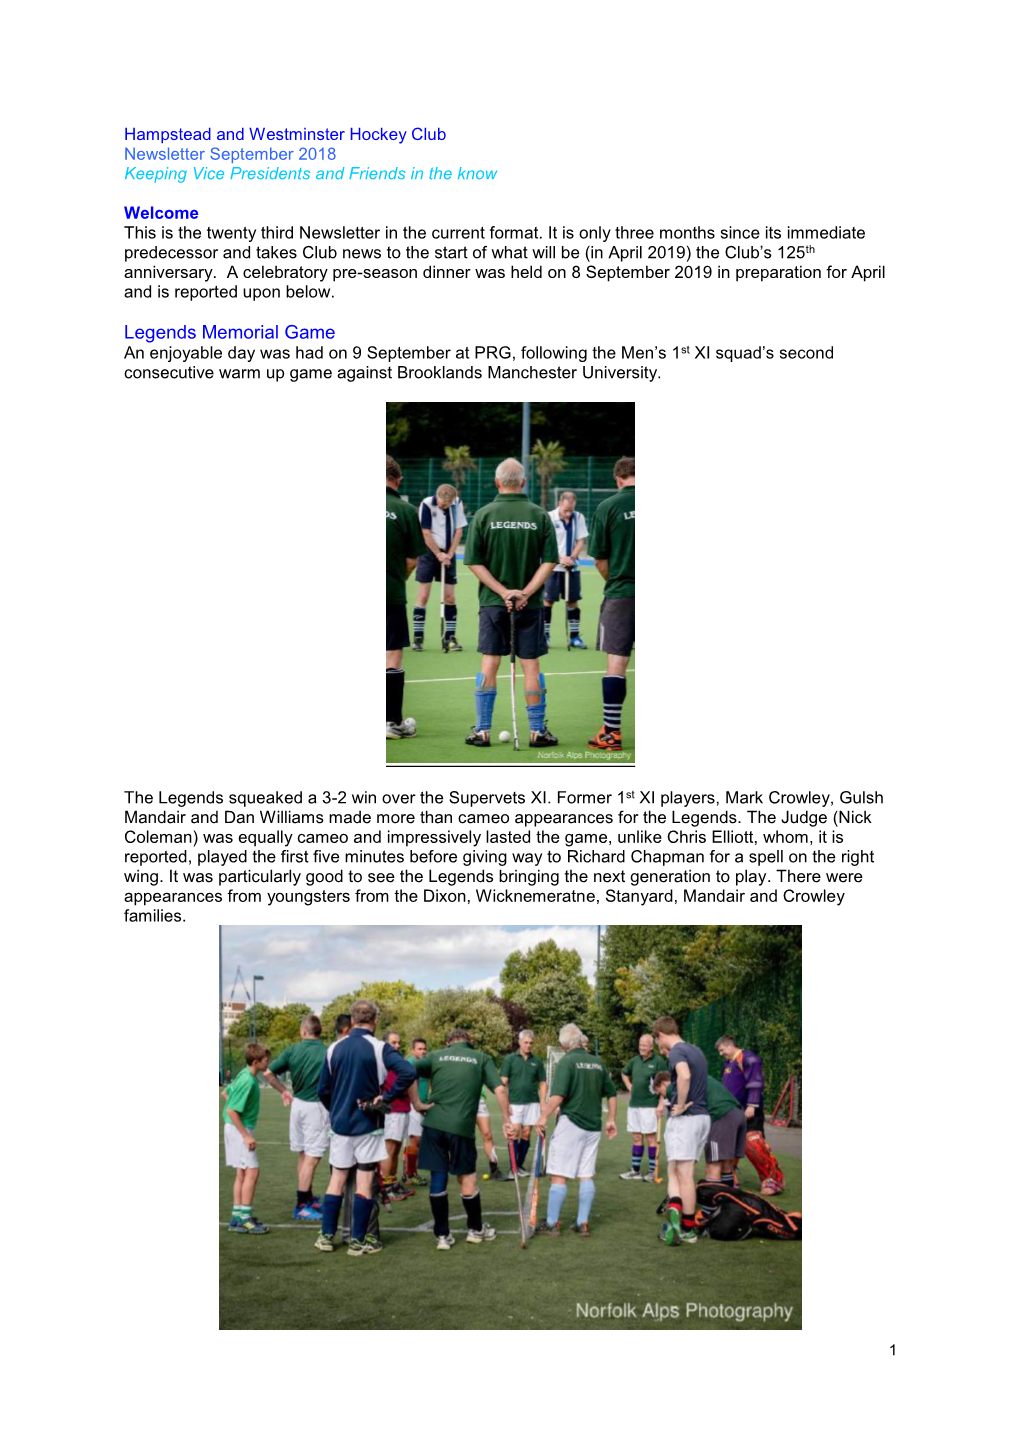 Hampstead and Westminster Hockey Club Newsletter September 2018 Keeping Vice Presidents and Friends in the Know